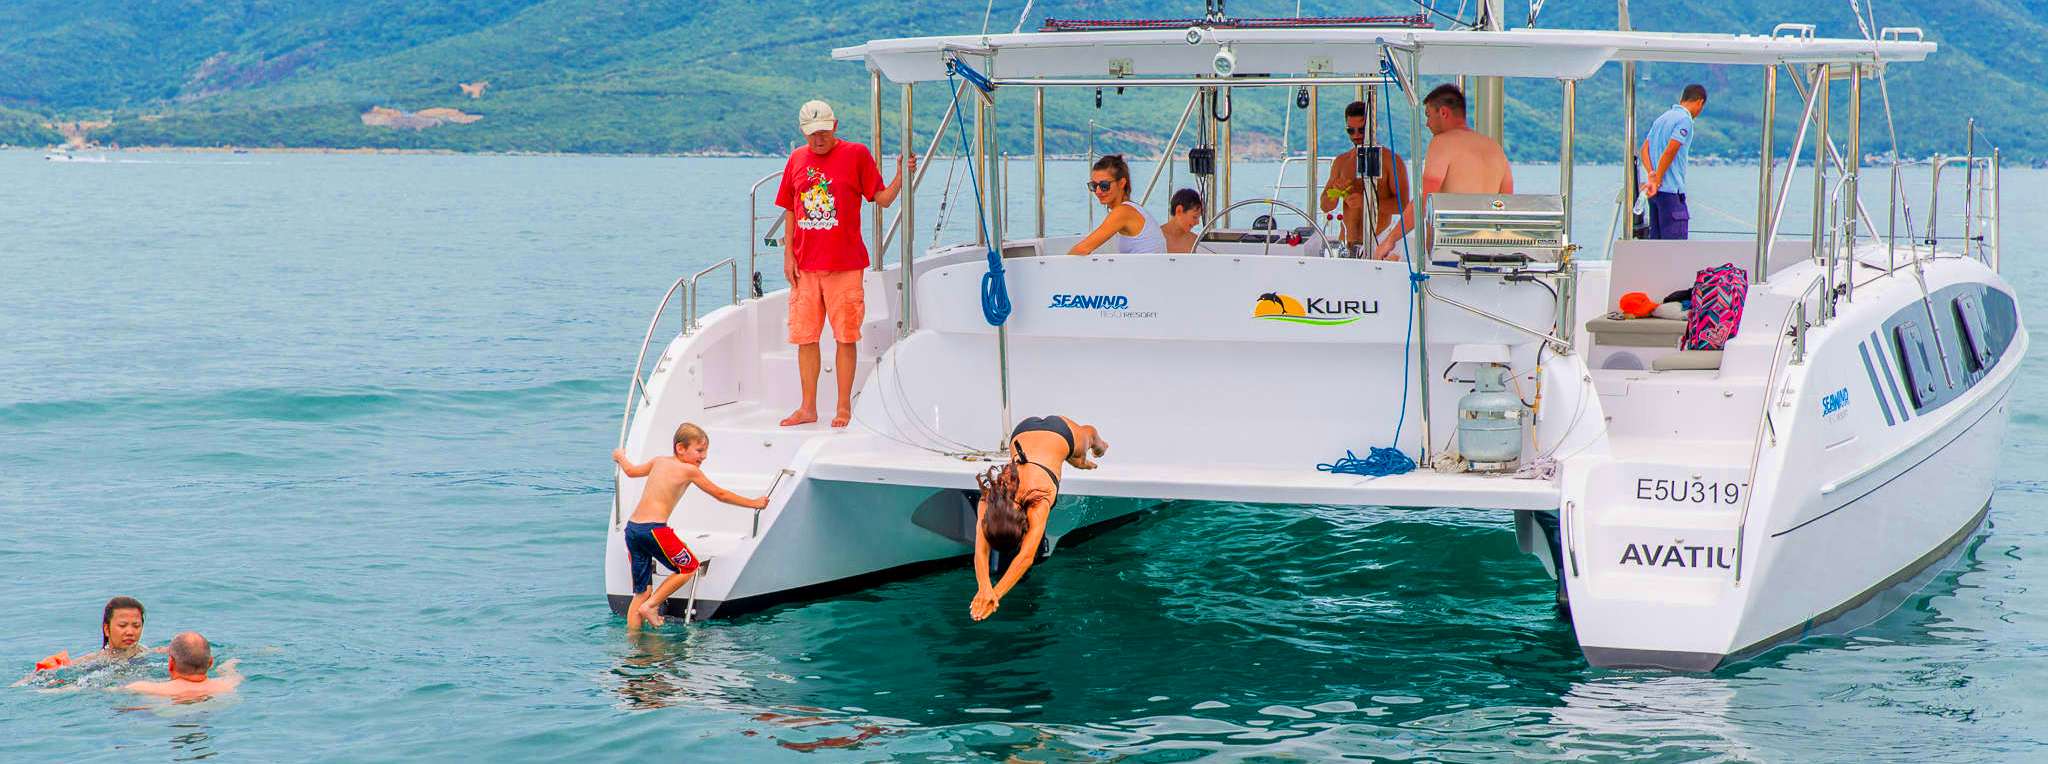 The 1160 Resort from Seawind Catamarans offers up to 43pax